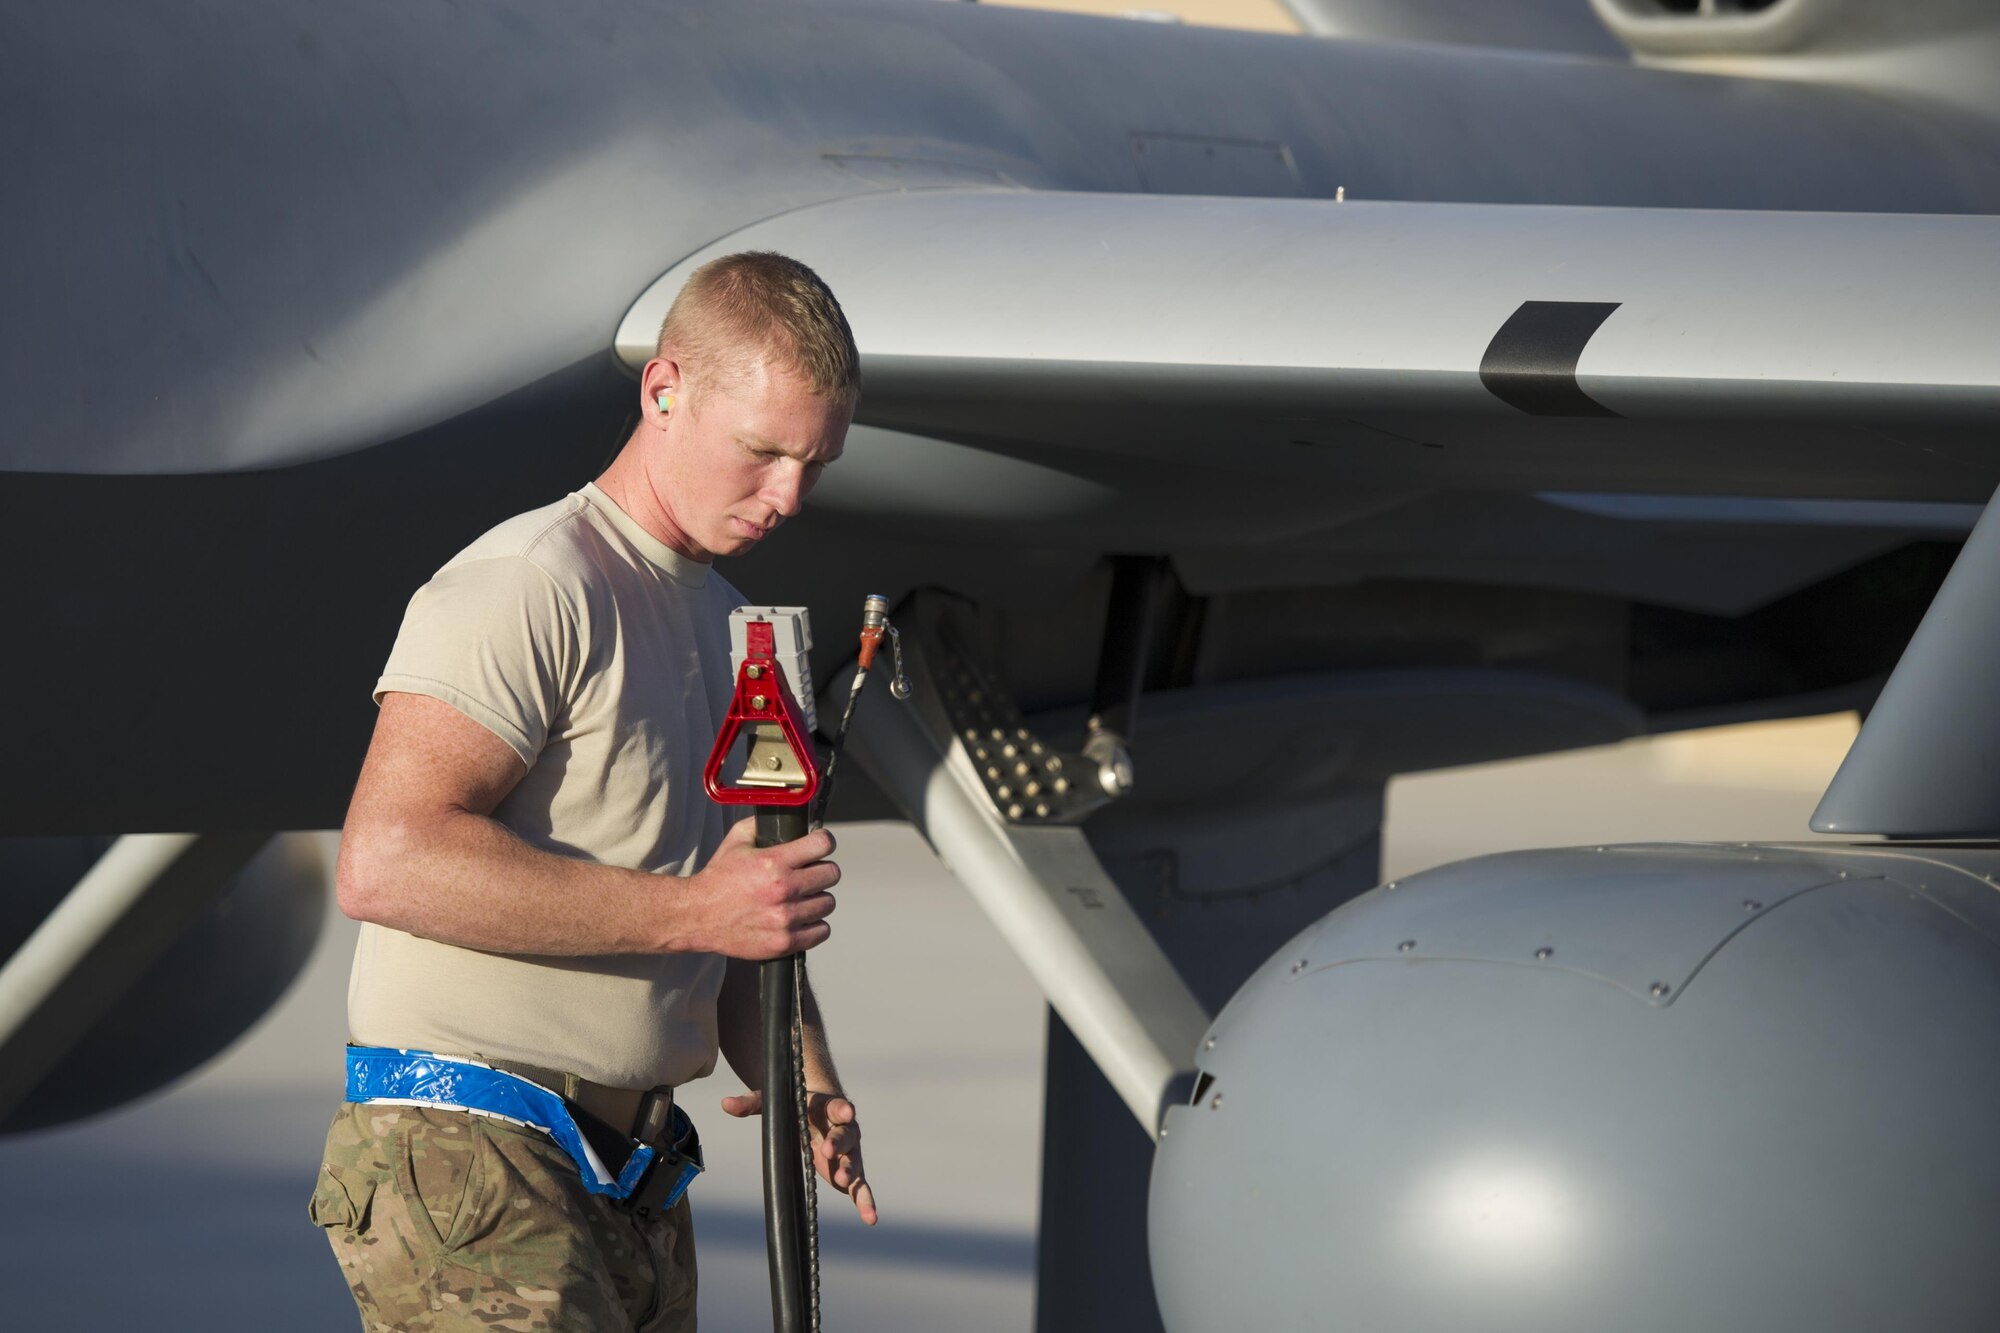 Airman 1st Class Landon, 62nd Expeditionary Reconnaissance Squadron aircraft specialist, removes a power cable from an MQ-9 Reaper prior to a sortie at Kandahar Airfield, Afghanistan, Dec. 5, 2015. The Reaper is an armed, multi-mission, medium-altitude, long-endurance remotely piloted aircraft that is employed primarily as an intelligence-collection asset and secondarily against dynamic execution targets. (U.S. Air Force photo by Tech. Sgt. Robert Cloys/Released)